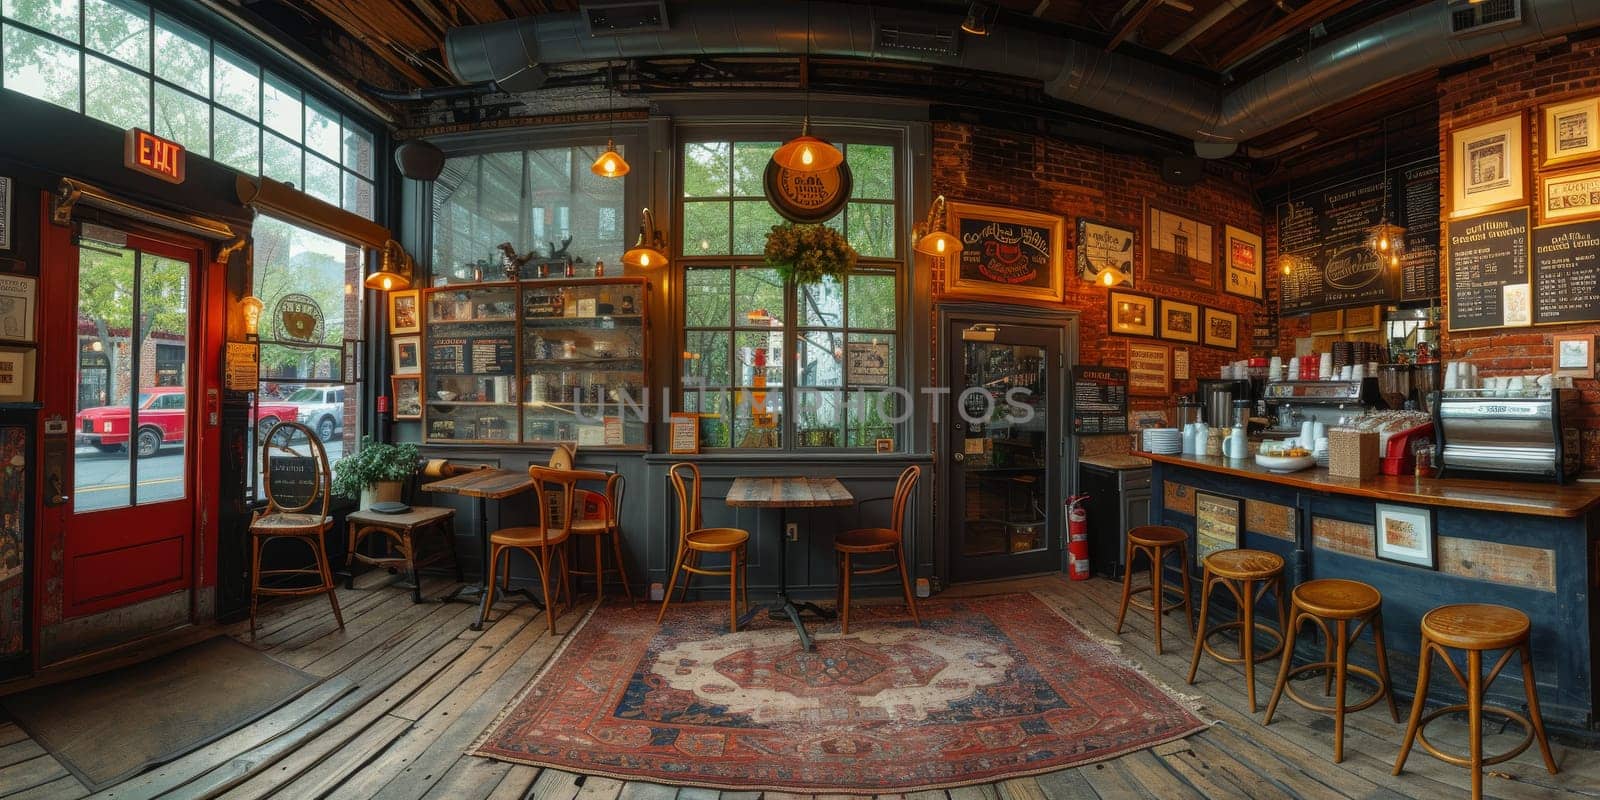 Cafe bar restaurant nobody indoor. Empty coffee shop interior daytime with wooden design counter red brick wall in background